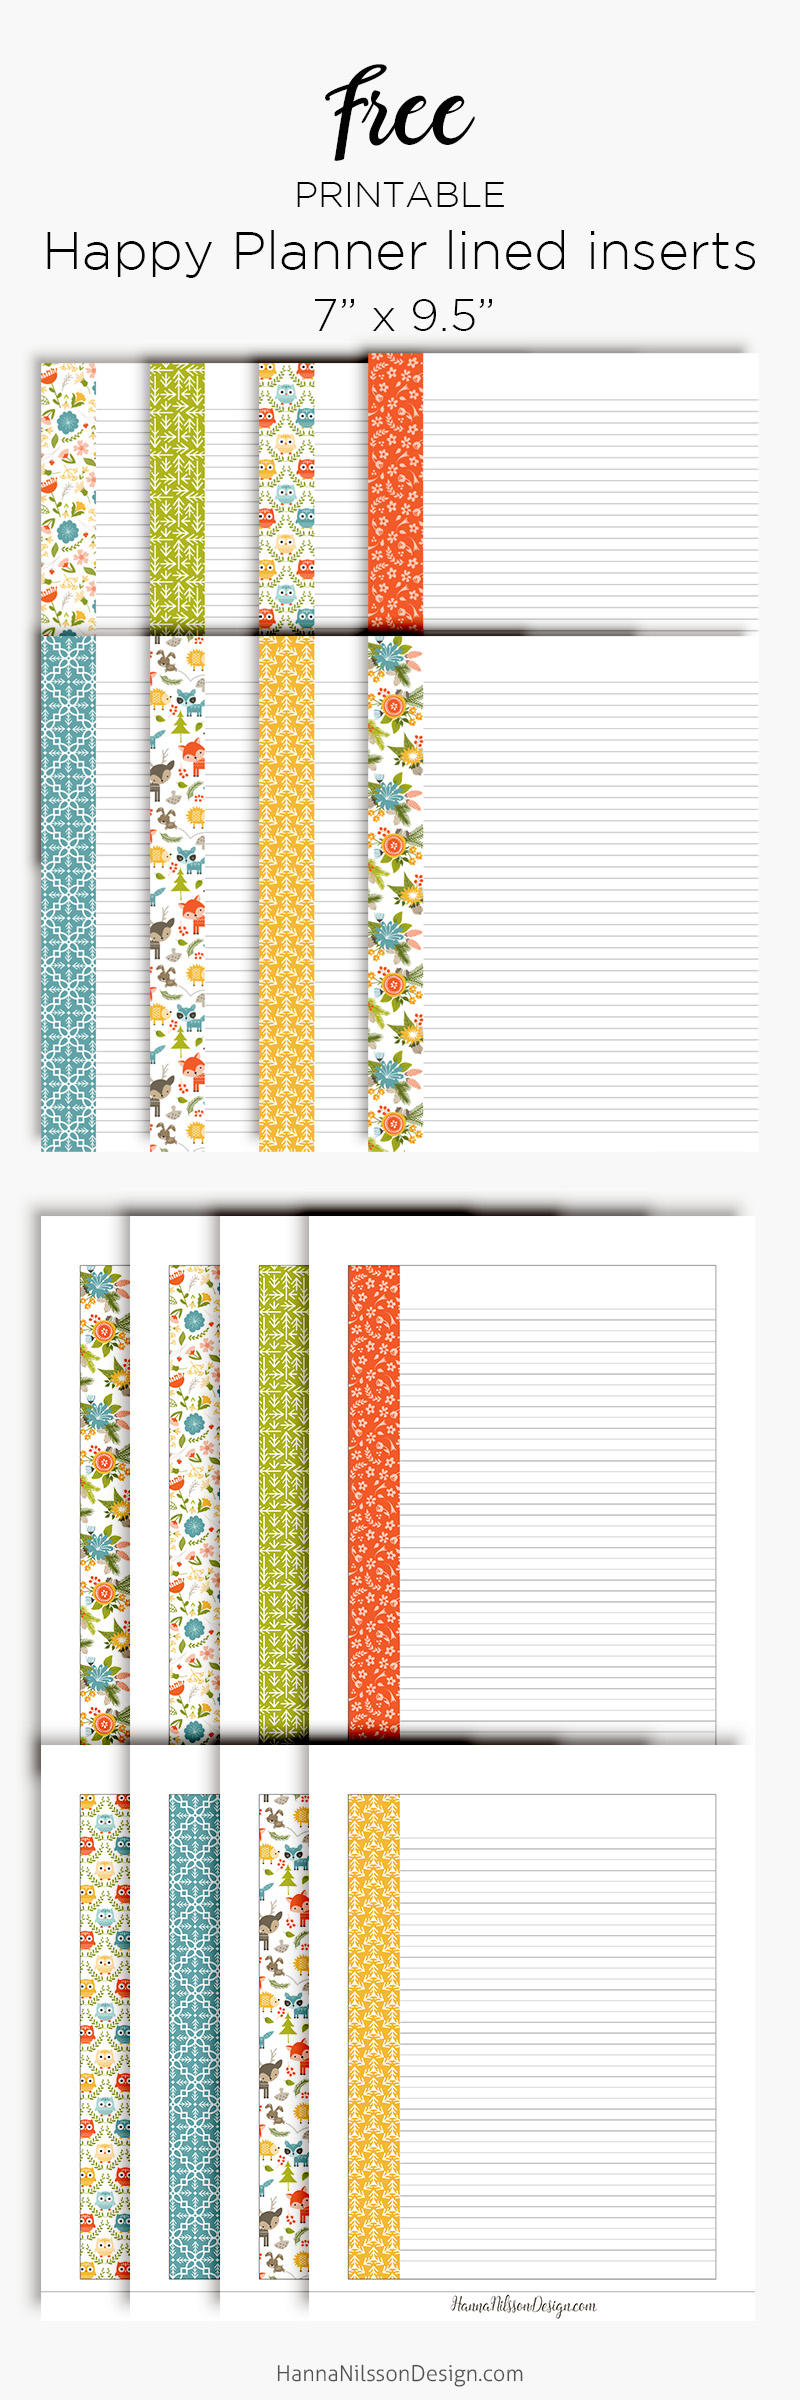 lined-planner-inserts-happy-planner-a5-personal-size-printables